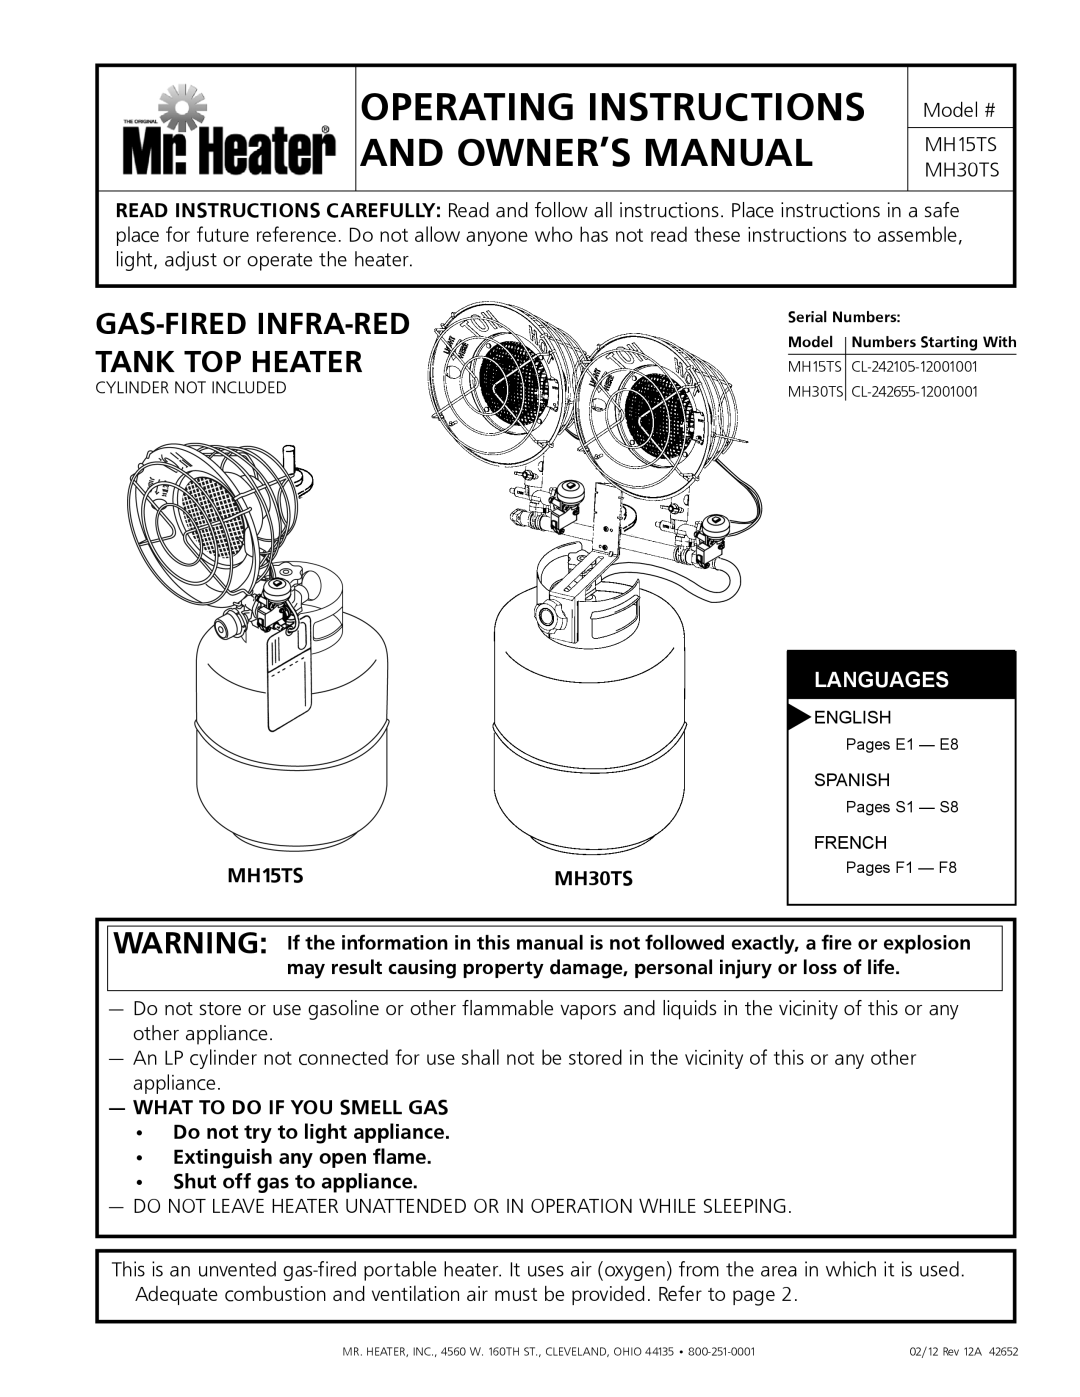 Mr. Heater MH15tS operating instructions Gas-fired Infra-Red, TANK tOP Heater, Languages, MH15TS, MH30TS 